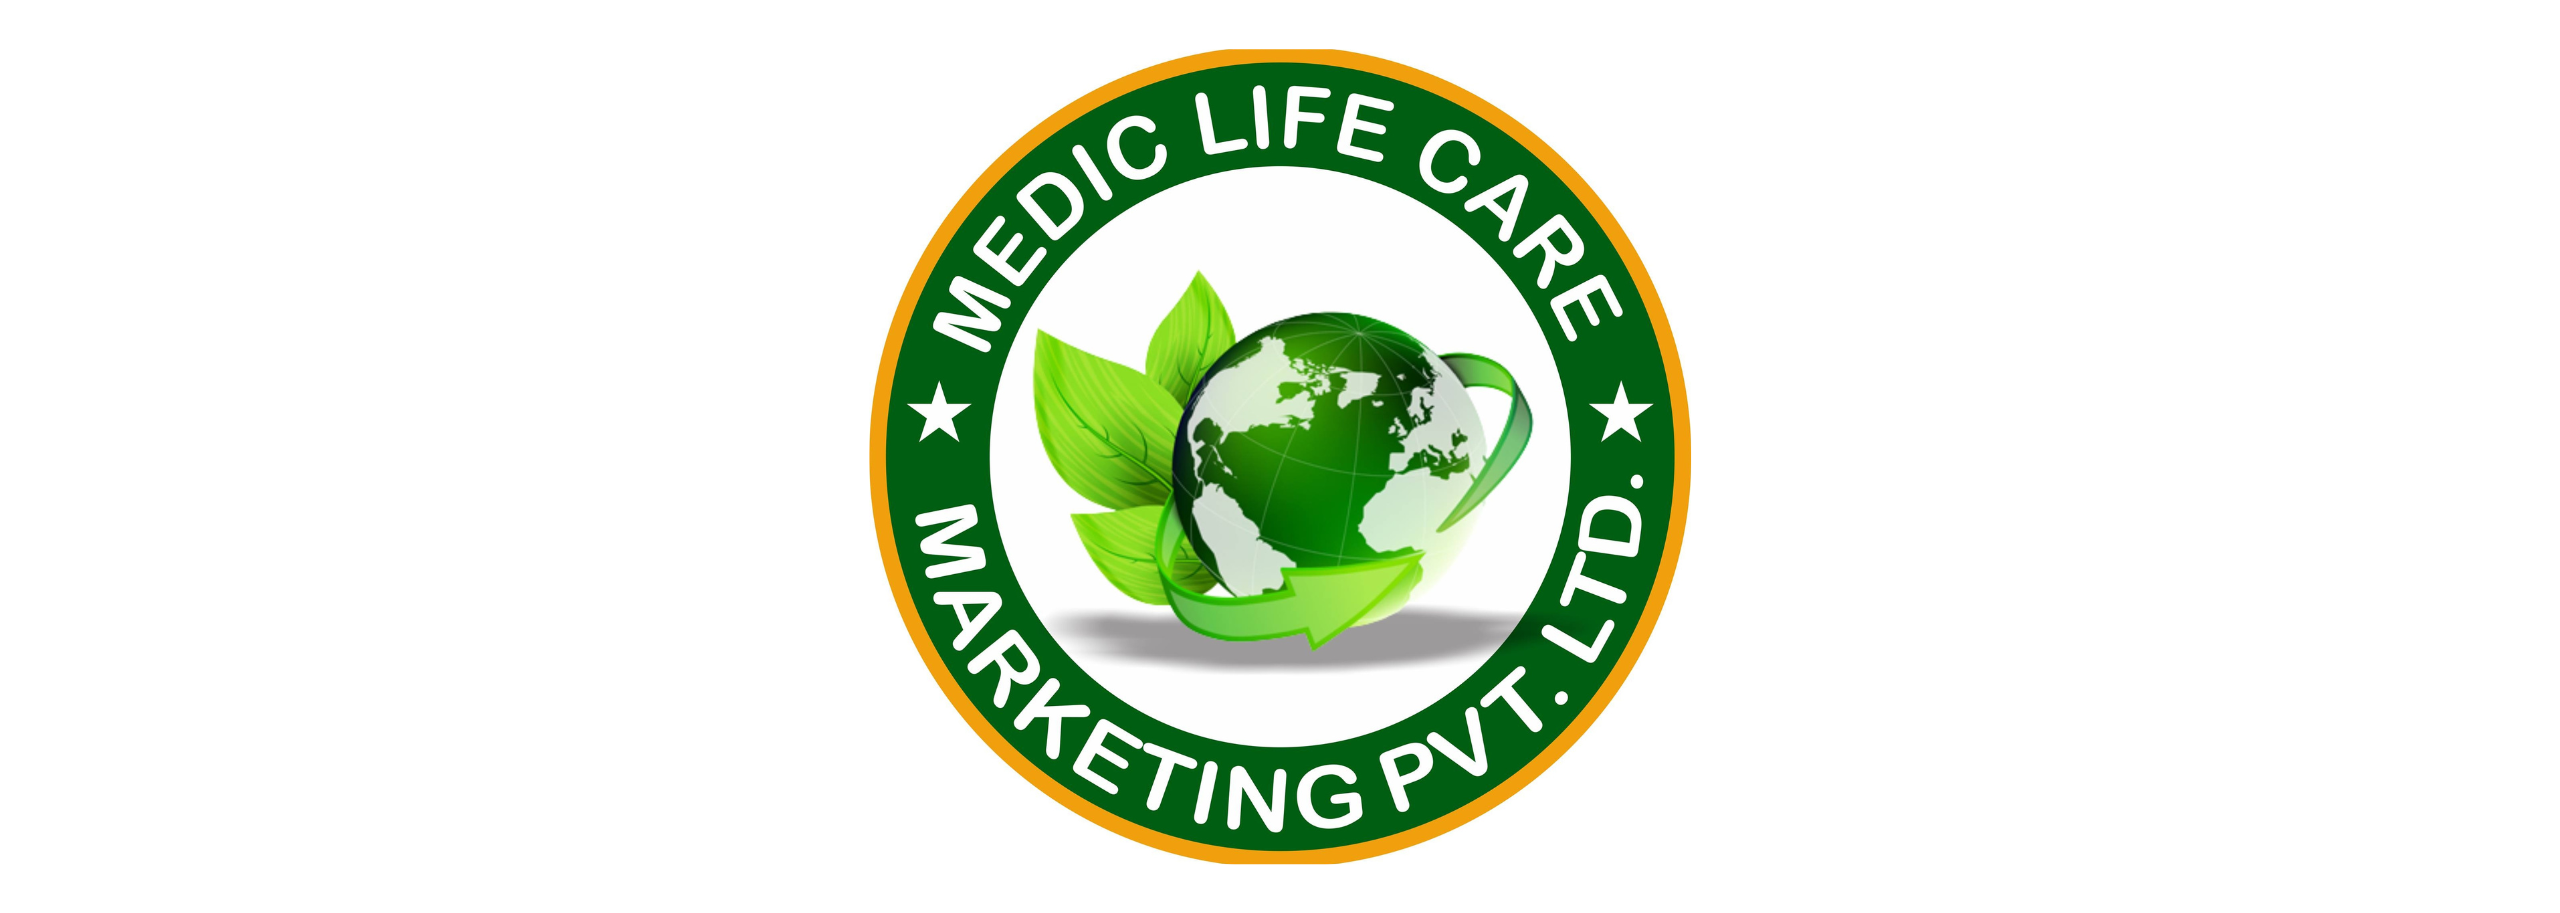 Medic Life Care Marketing Private Limited